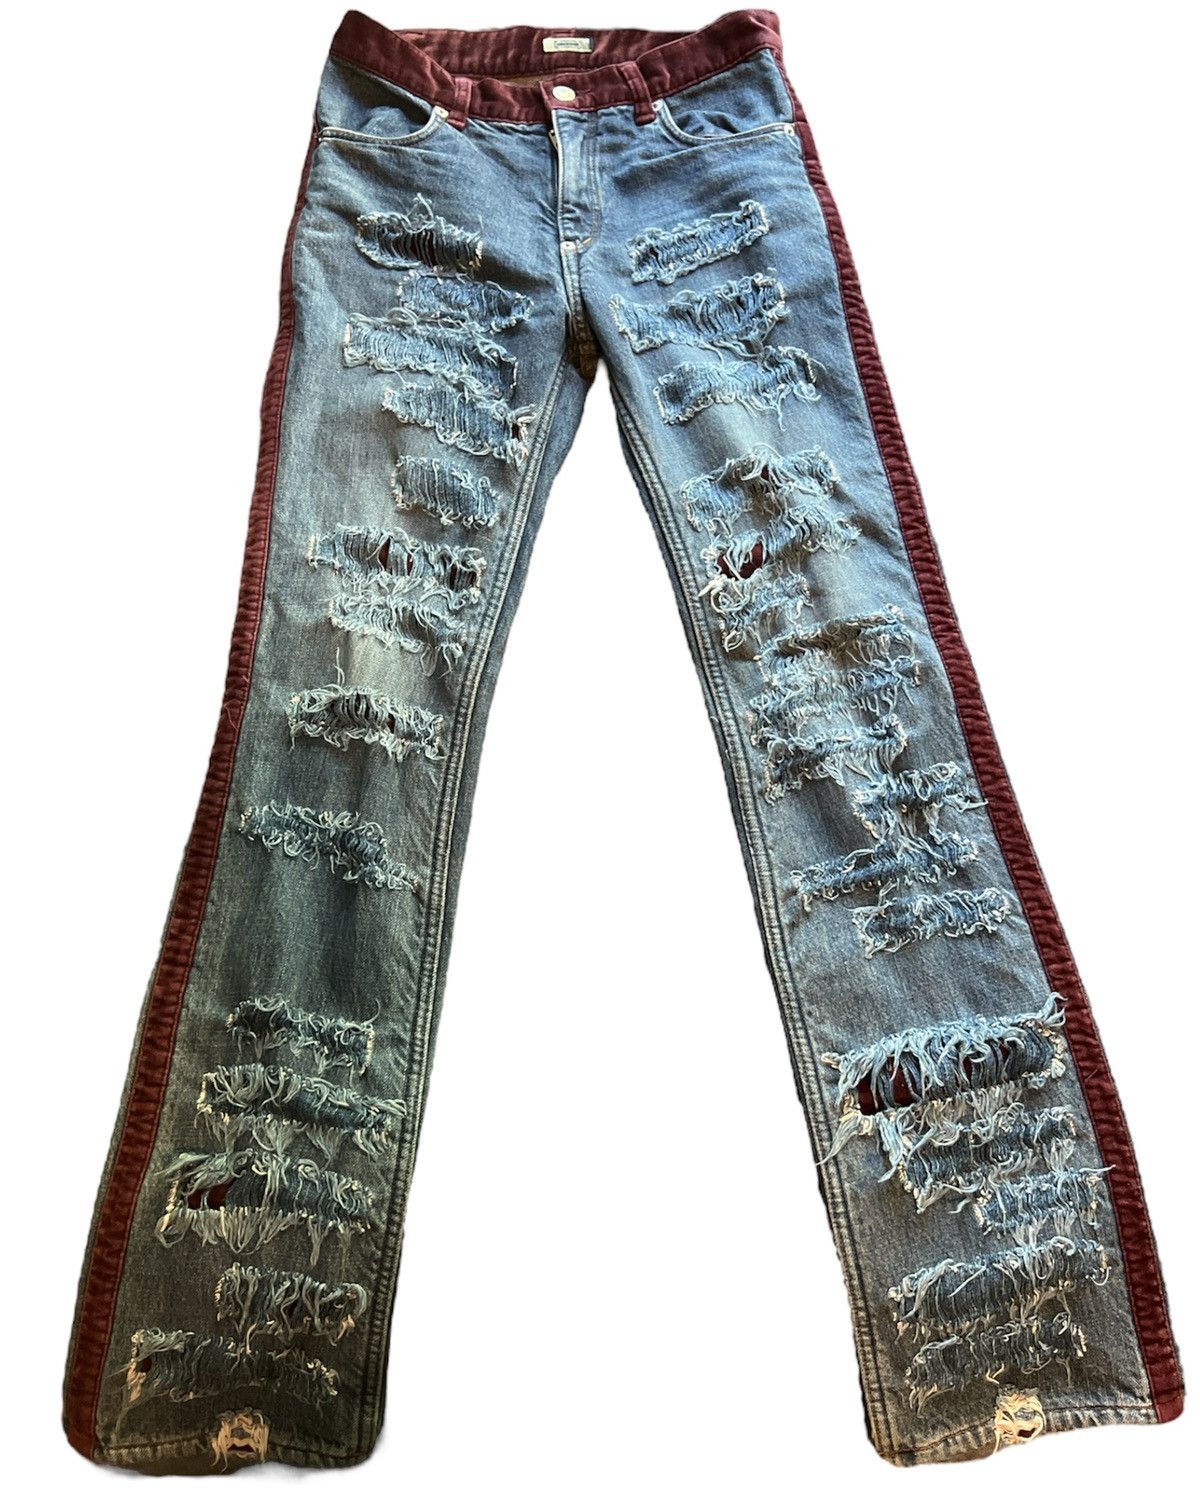 Undercover AW 2002 Crash Denim Undercover Witches Cell Division 